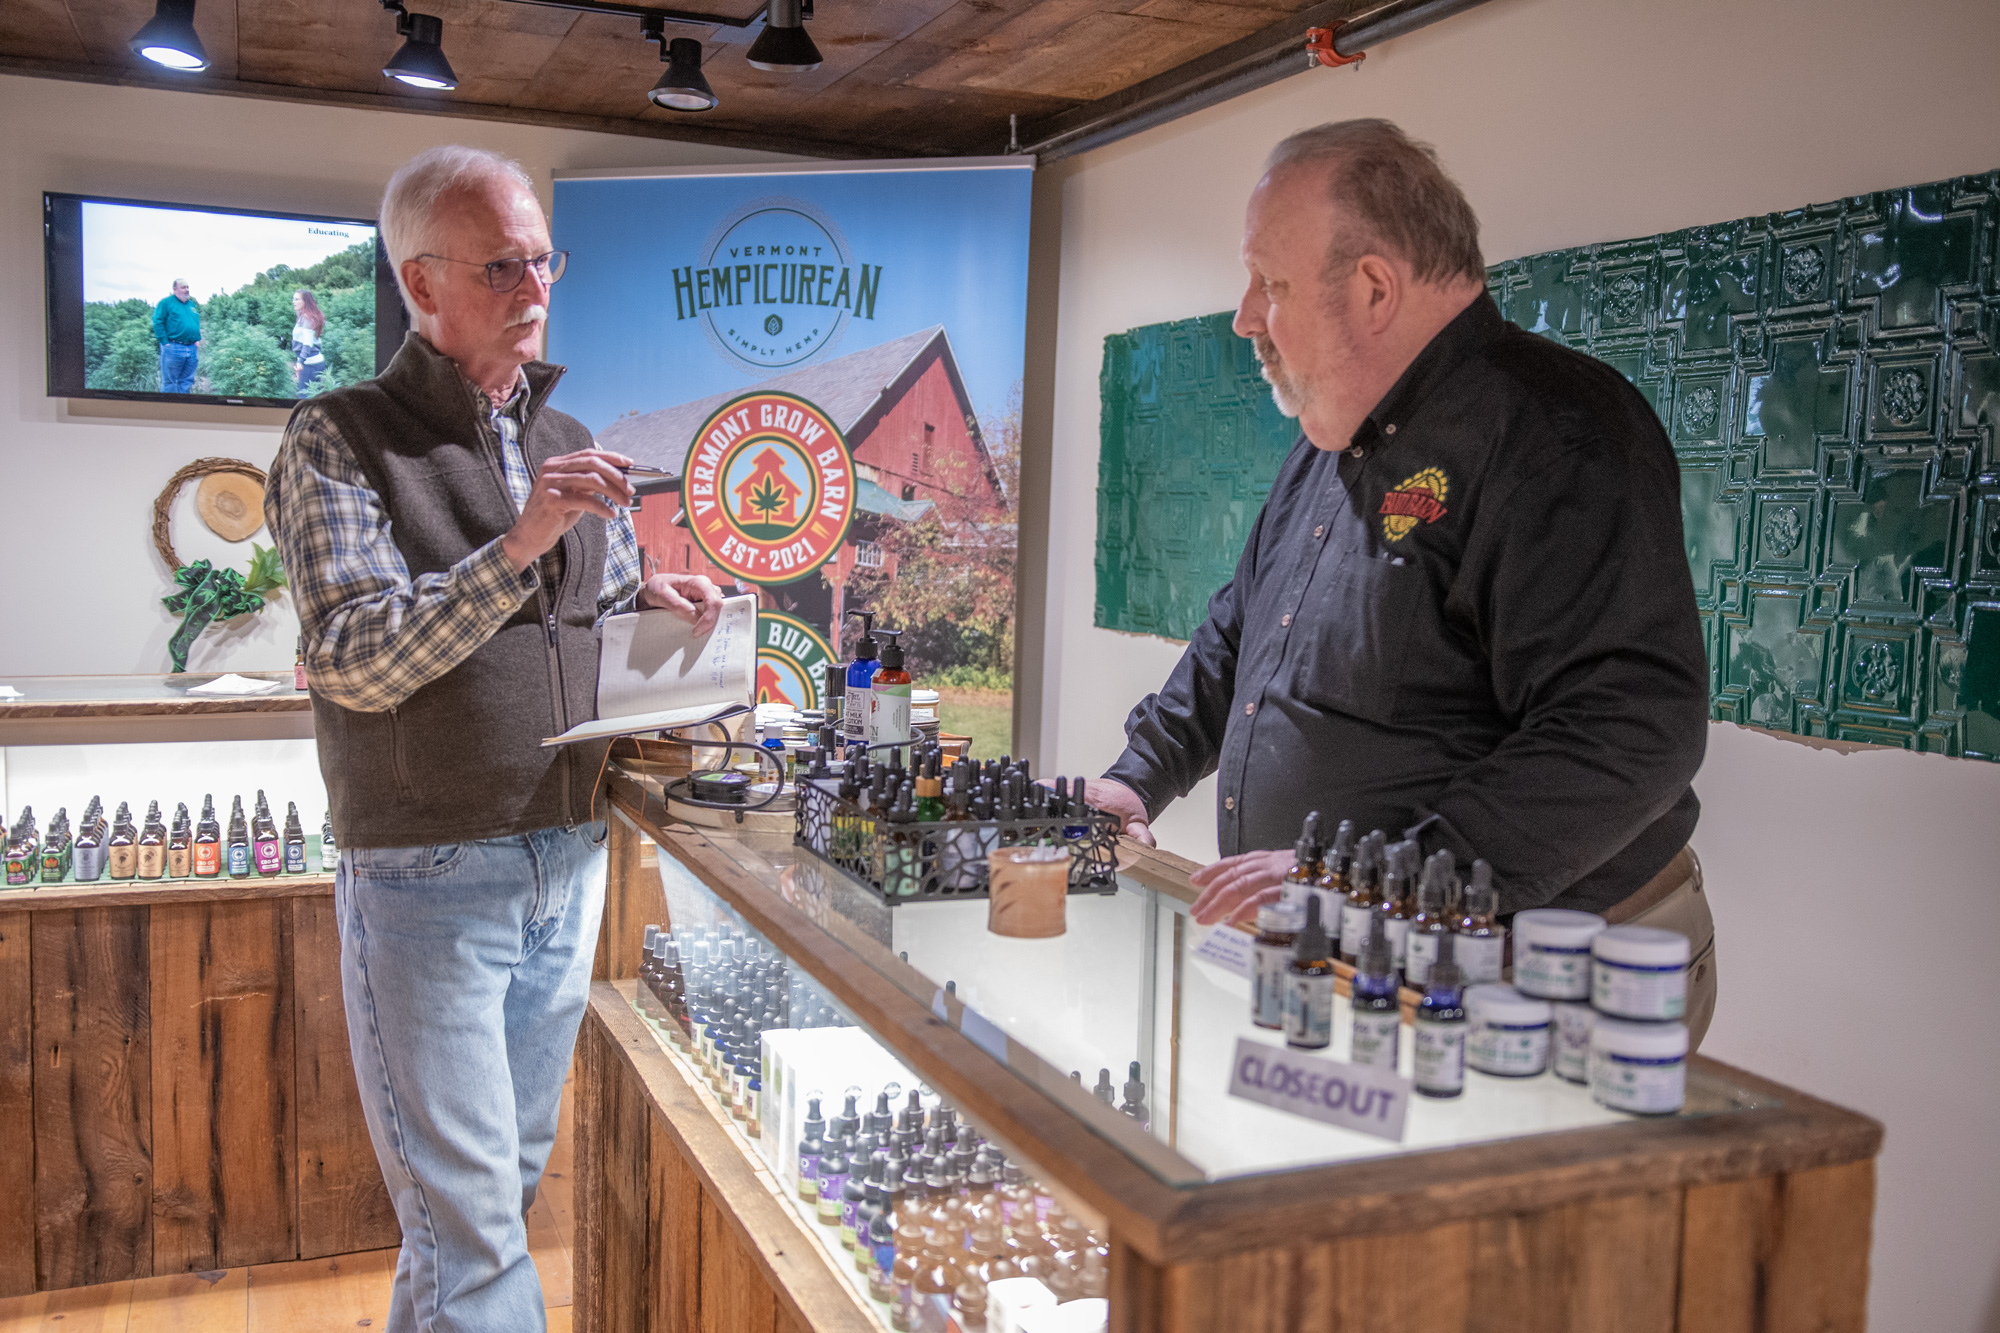 Vermont Sustainable Jobs Fund business coach Victor Morrison, left, consults Scott Sparks on a recent visit to Vermont Hempicurean in West Brattleboro. Photo by Erica Houskeeper.